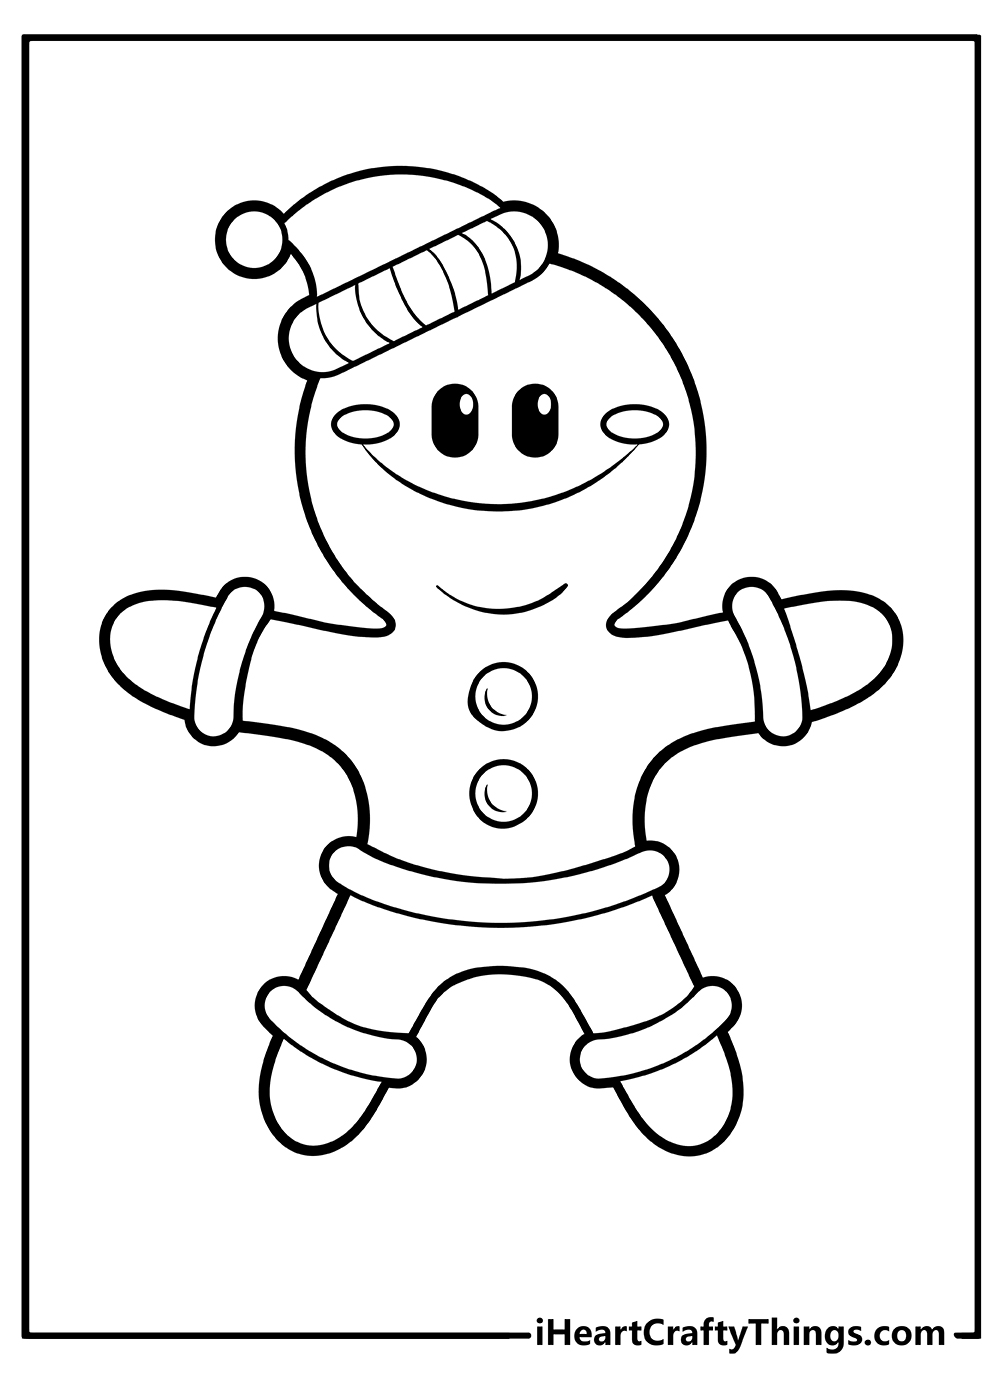 Christmas Coloring Pages for kids free printable